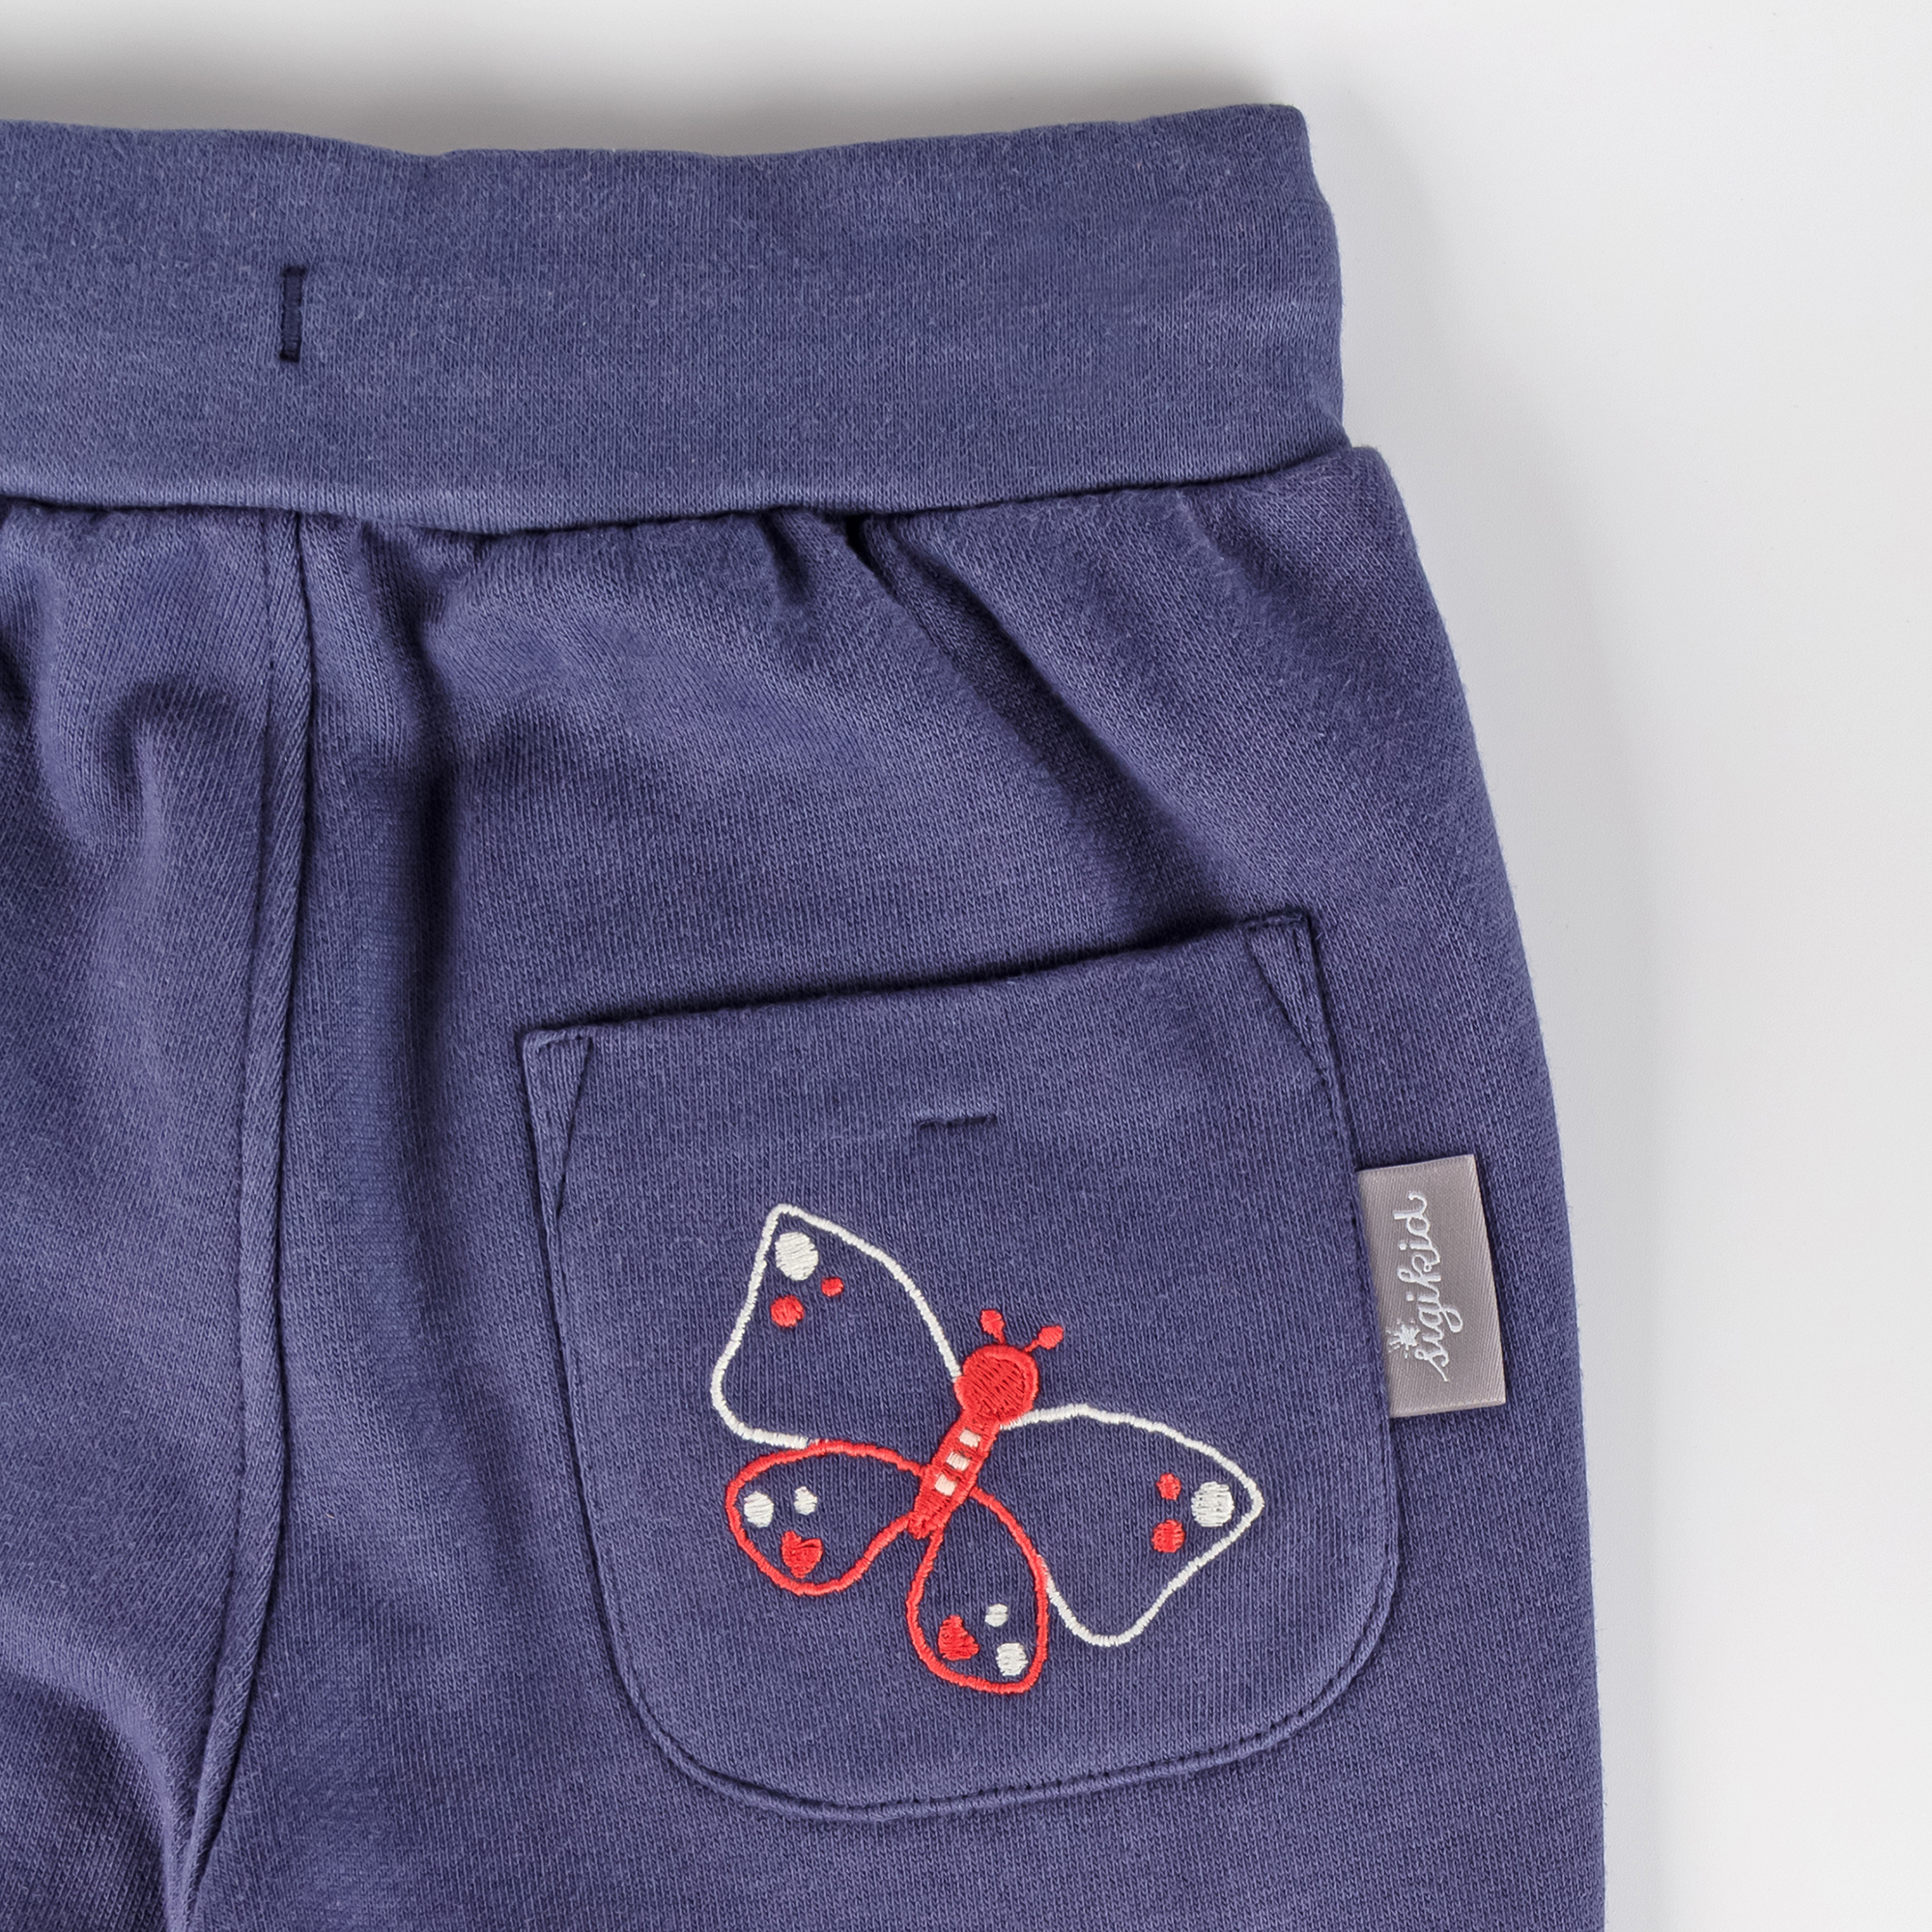 Children's navy sweat pants, butterfly on the back